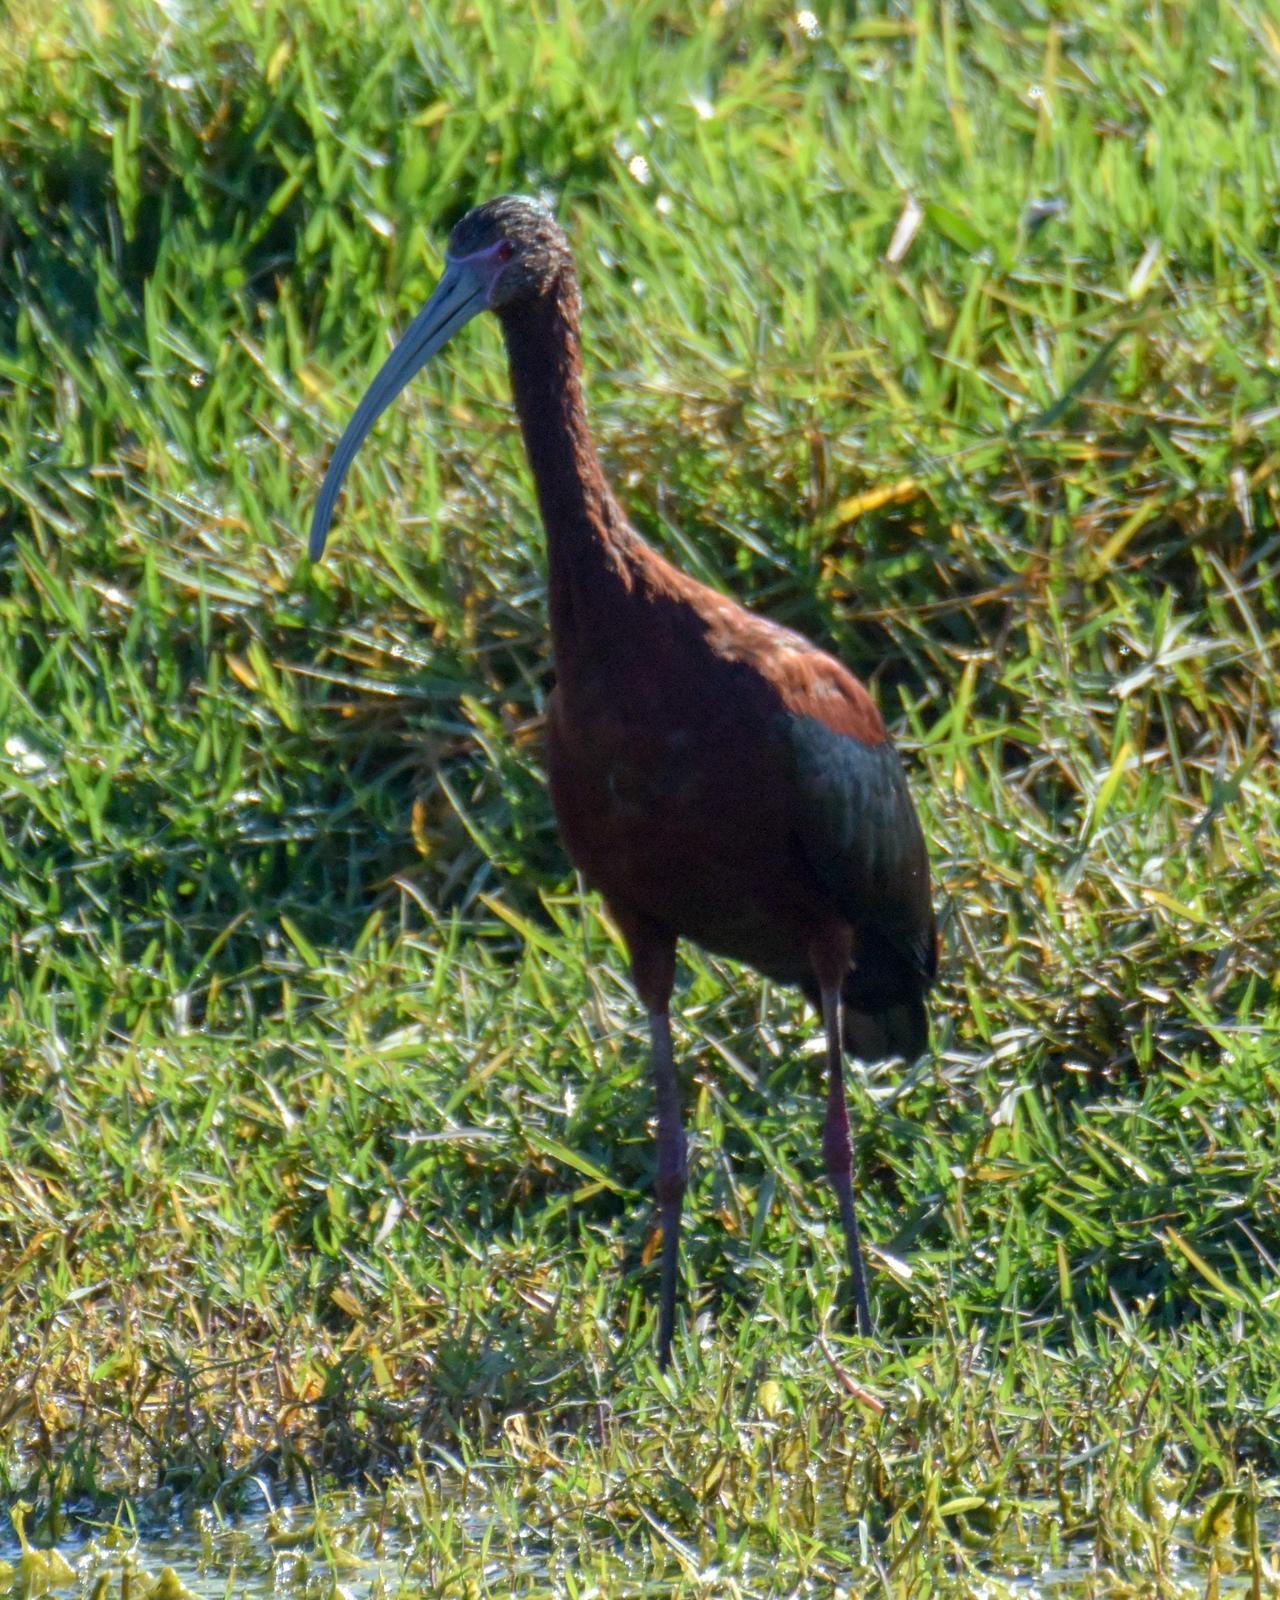 White-faced Ibis Photo by Emily Percival